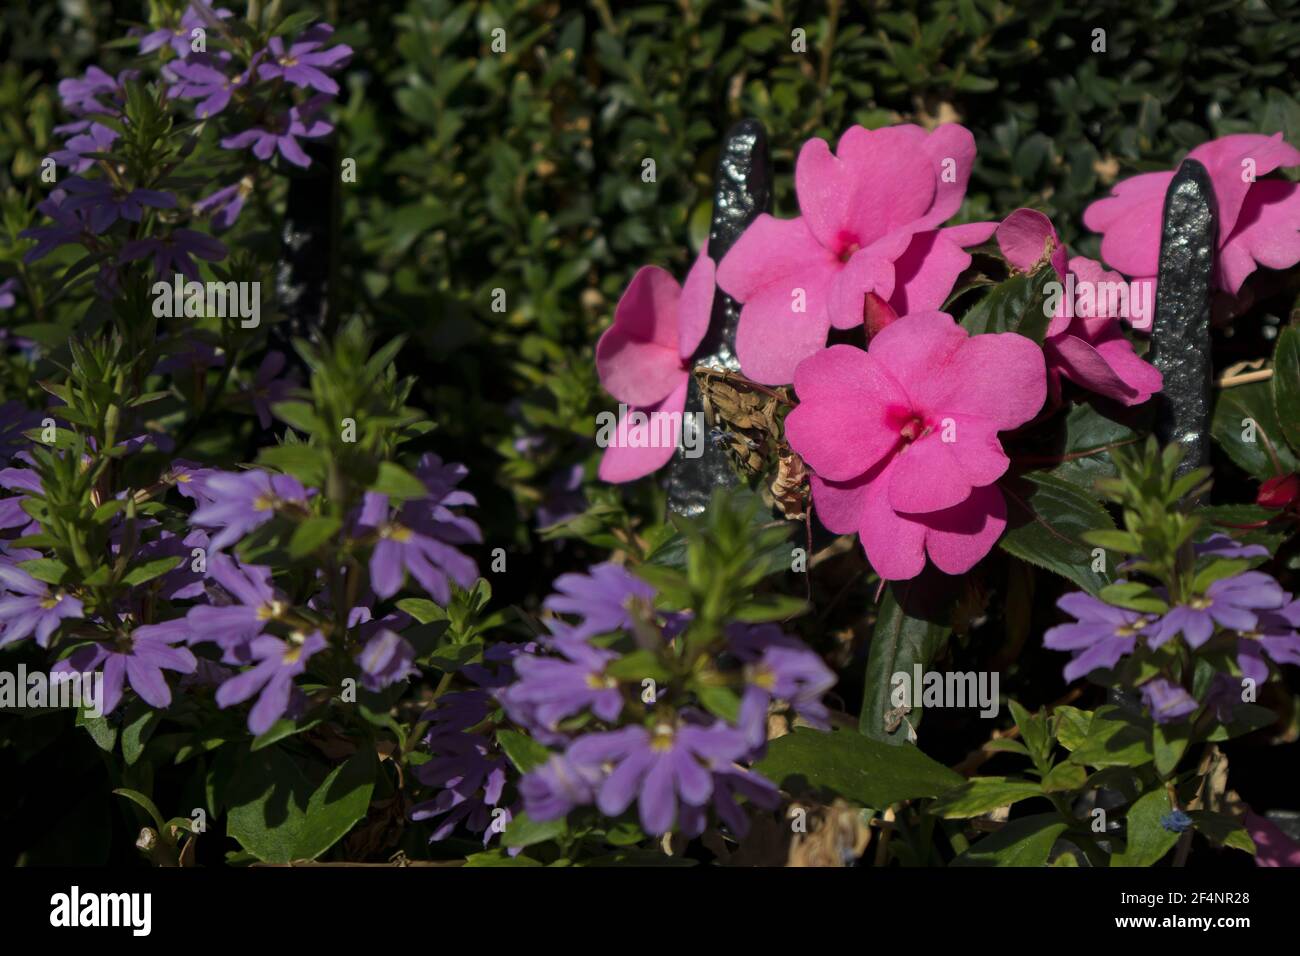 Pink begonia flowers in garden against the background of blue bushes Stock Photo